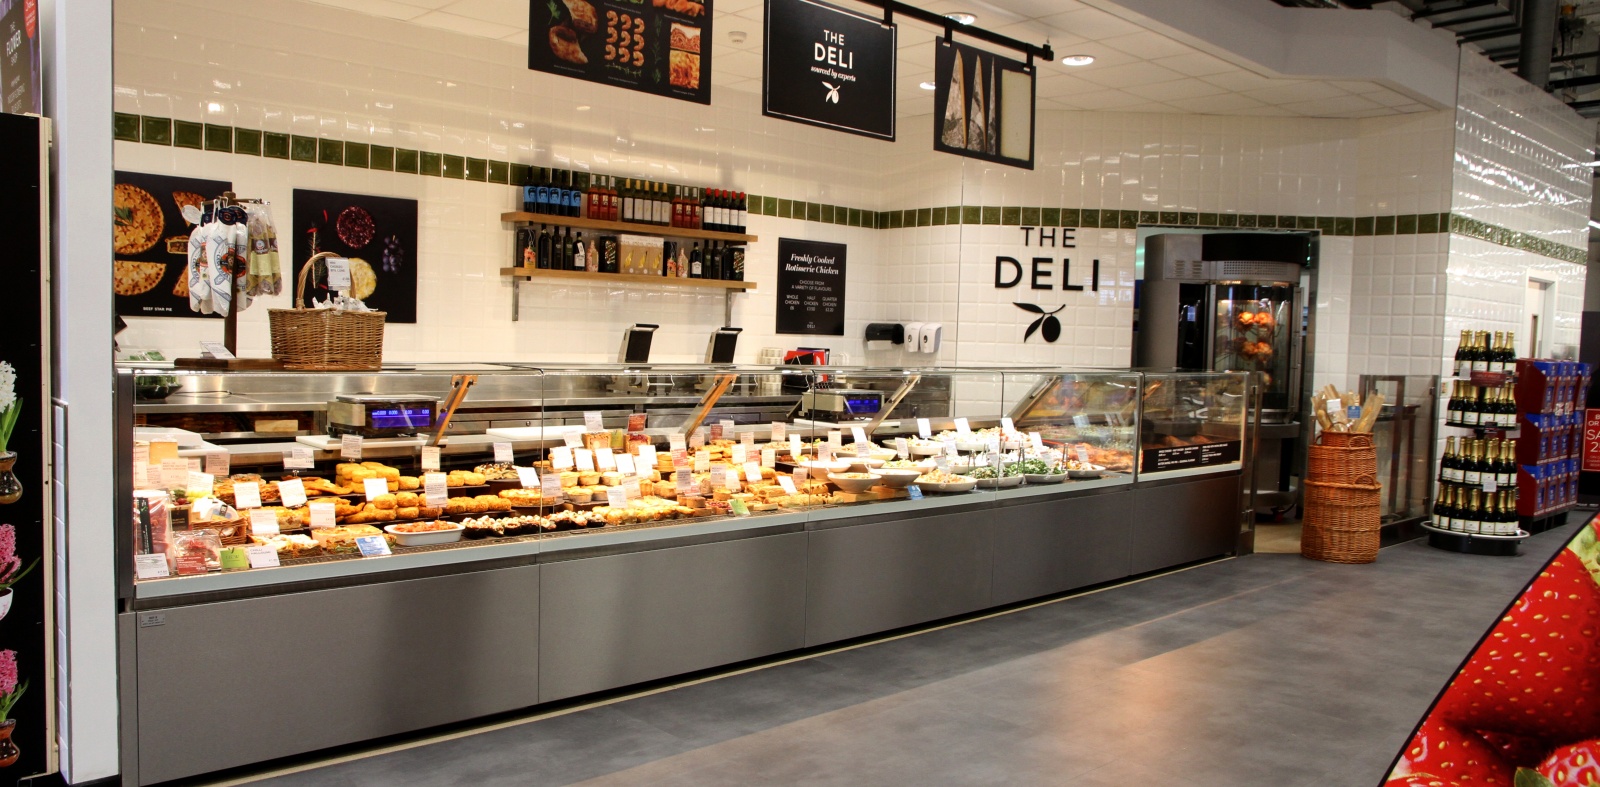 Bespoke Deli Counters, Hot Food Counter